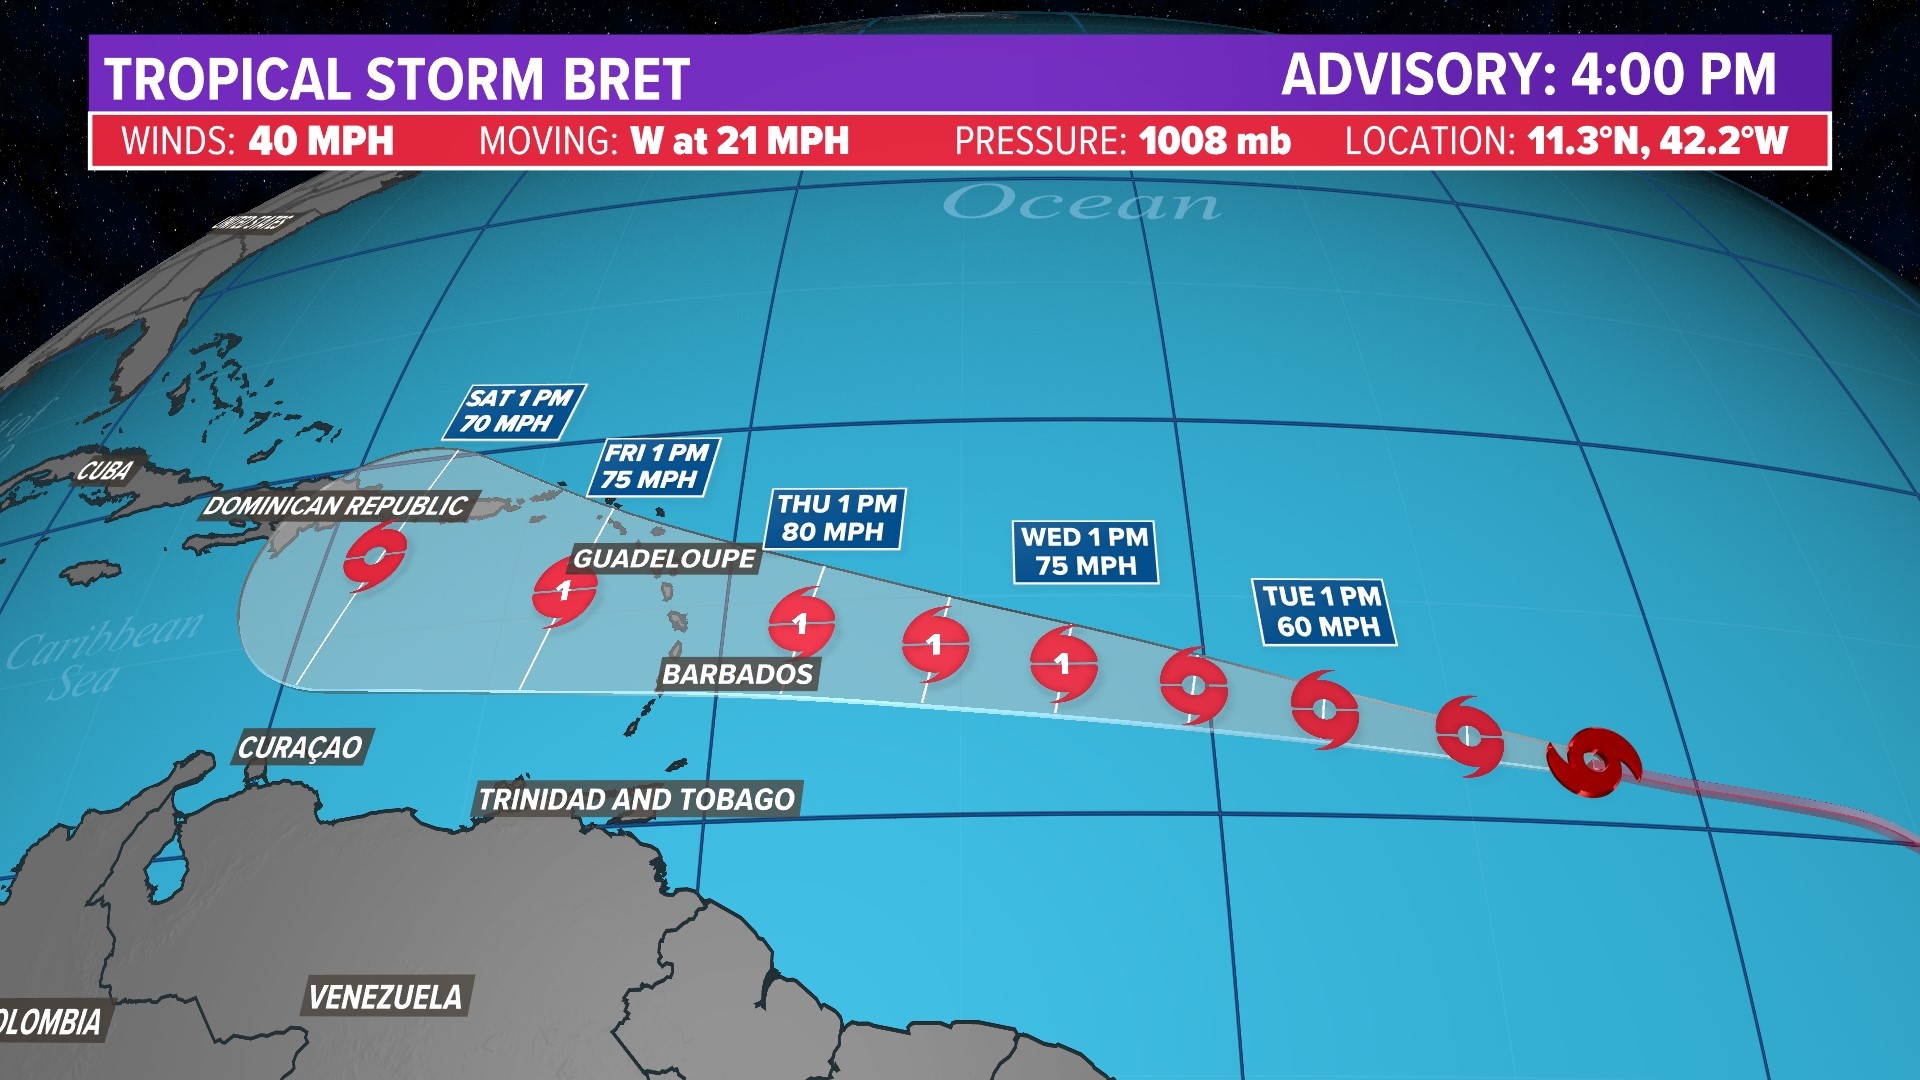 Meteorologist Tim Pandajis is tracking Bret, which became a tropical storm Monday afternoon.